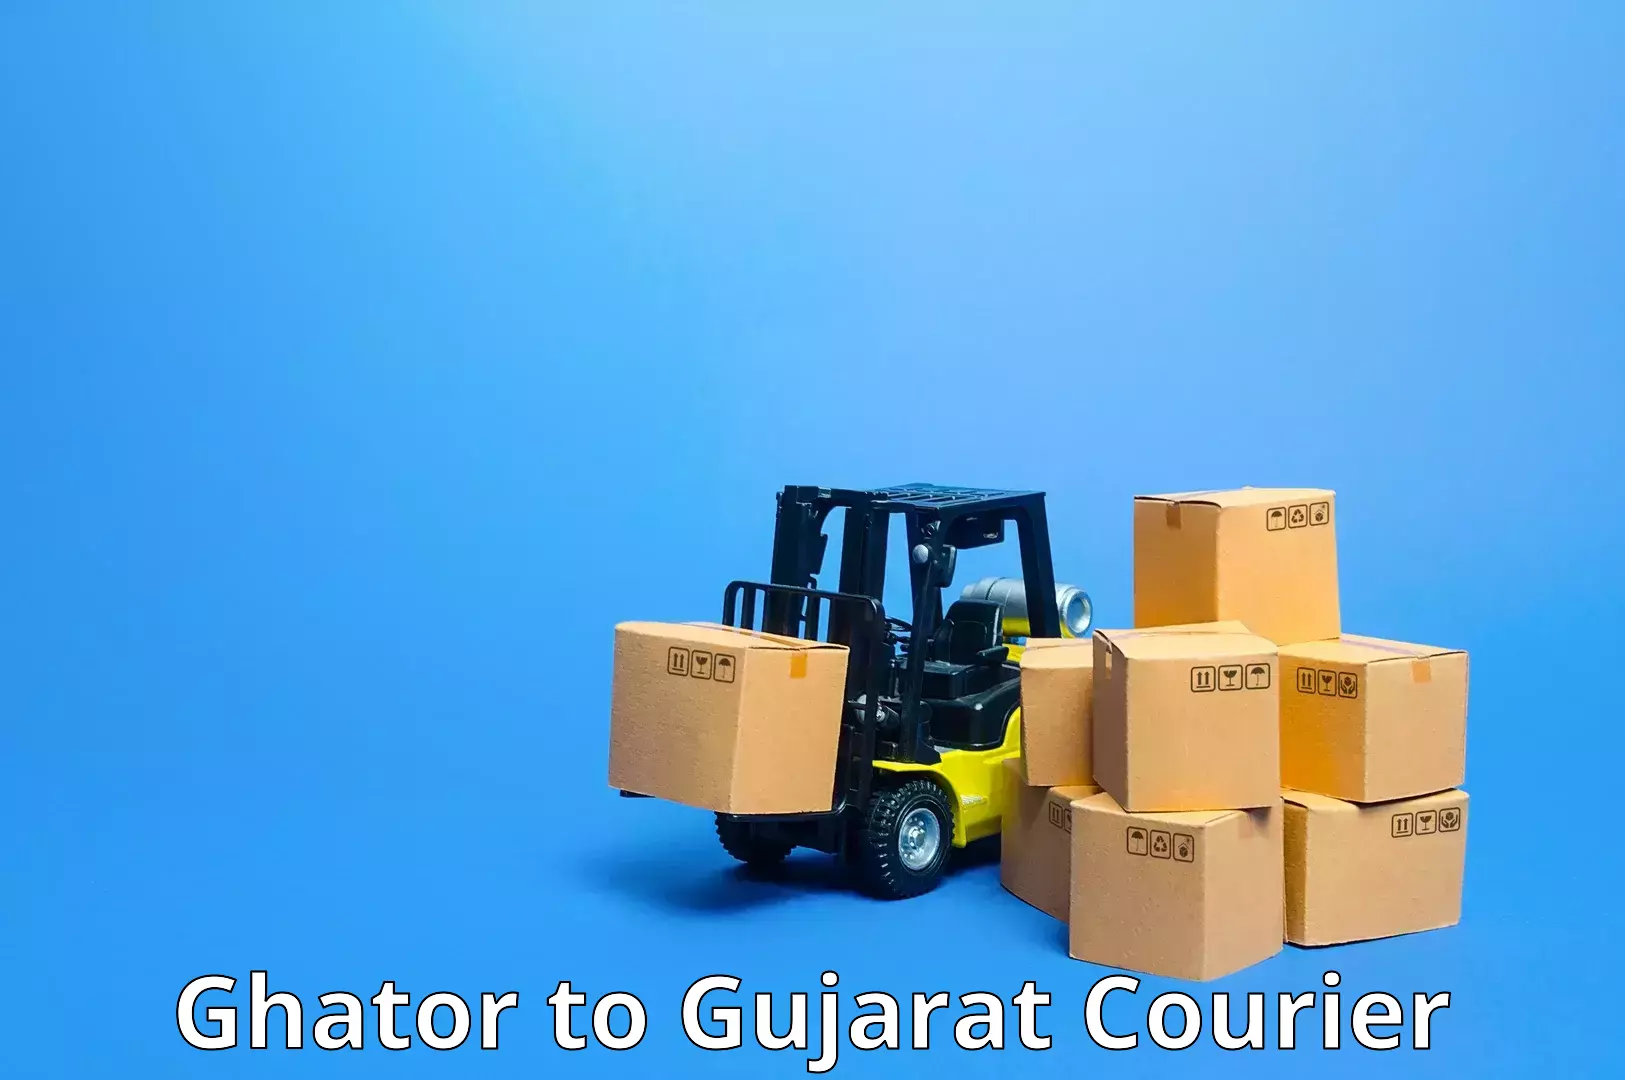 Courier service comparison Ghator to Ahmedabad